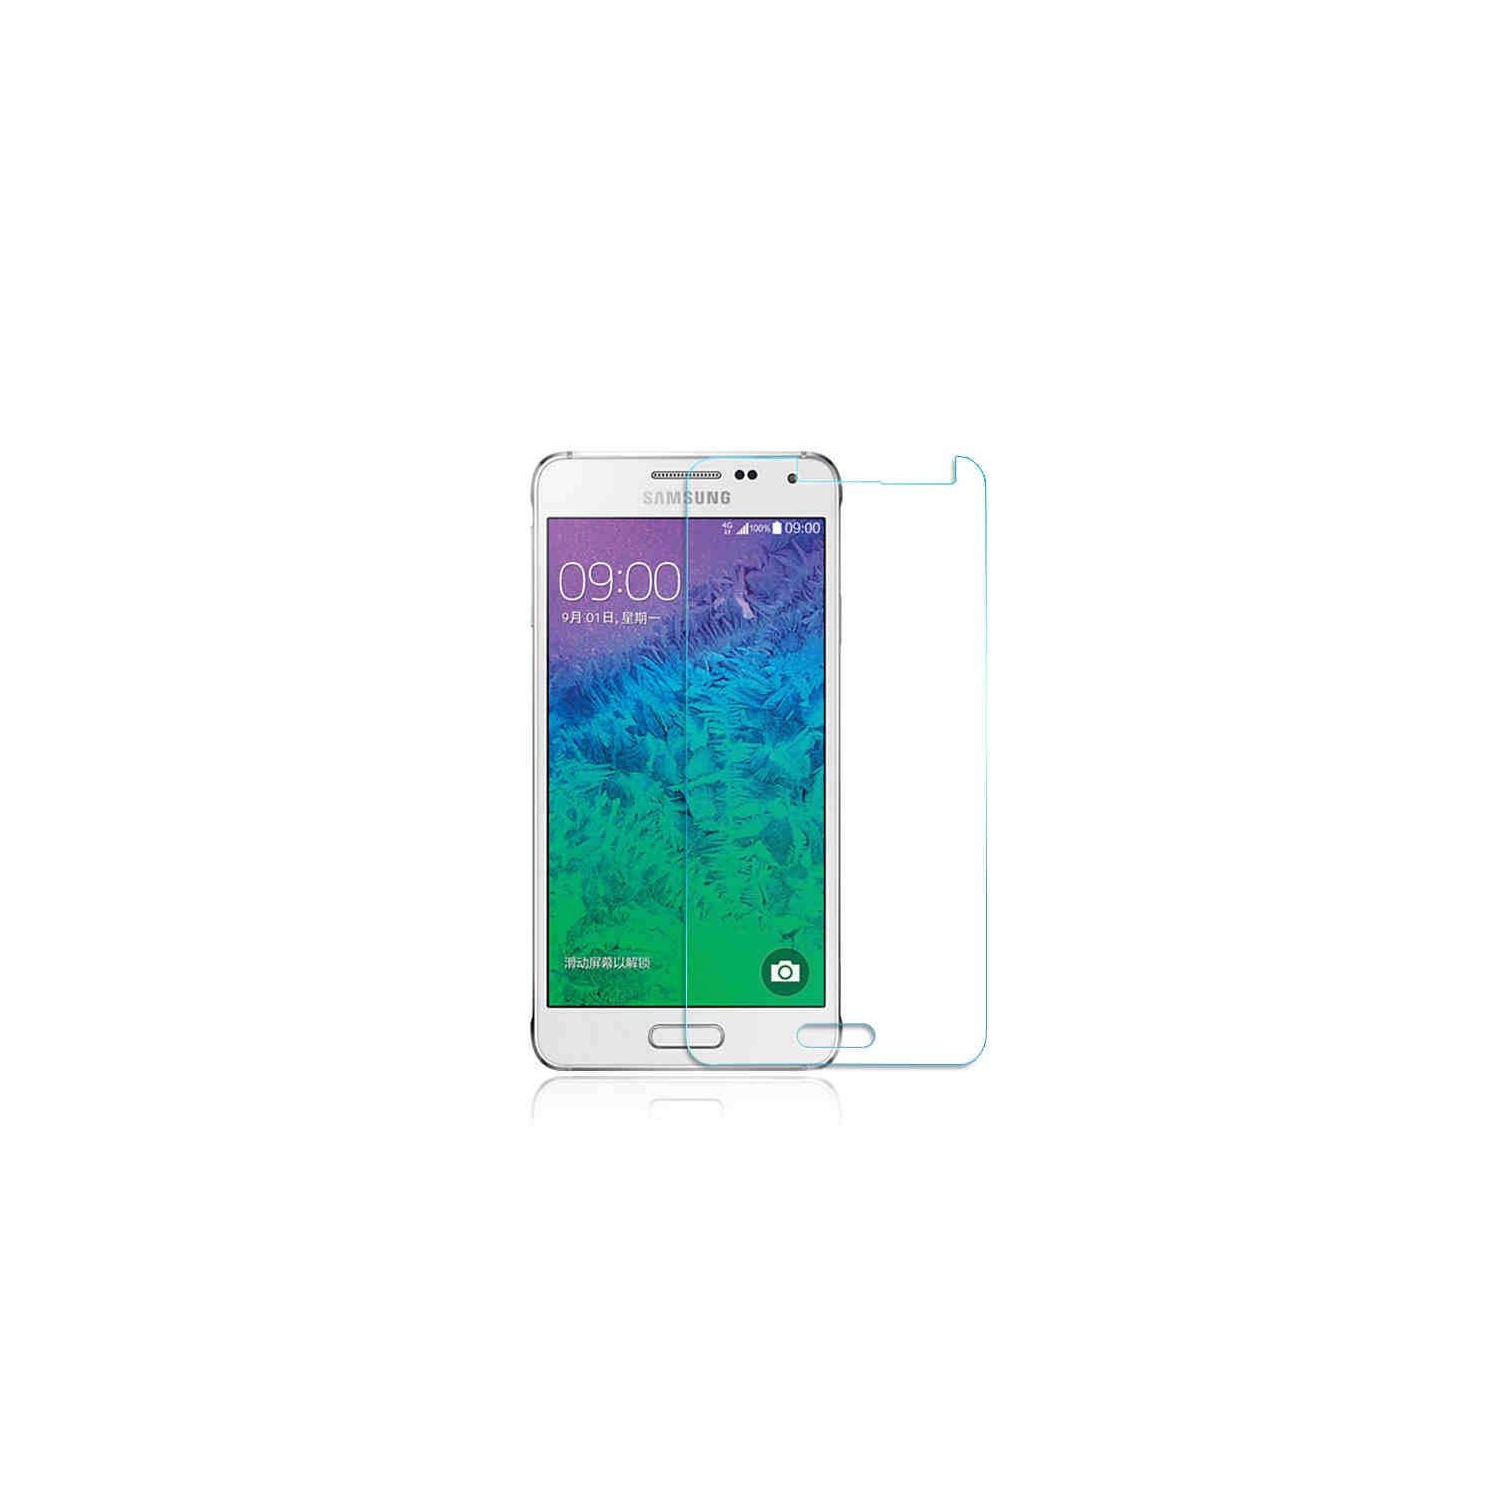 【2 Packs】 CSmart Premium Tempered Glass Screen Protector for Samsung Galaxy J1 2016, Case Friendly & Bubble Free